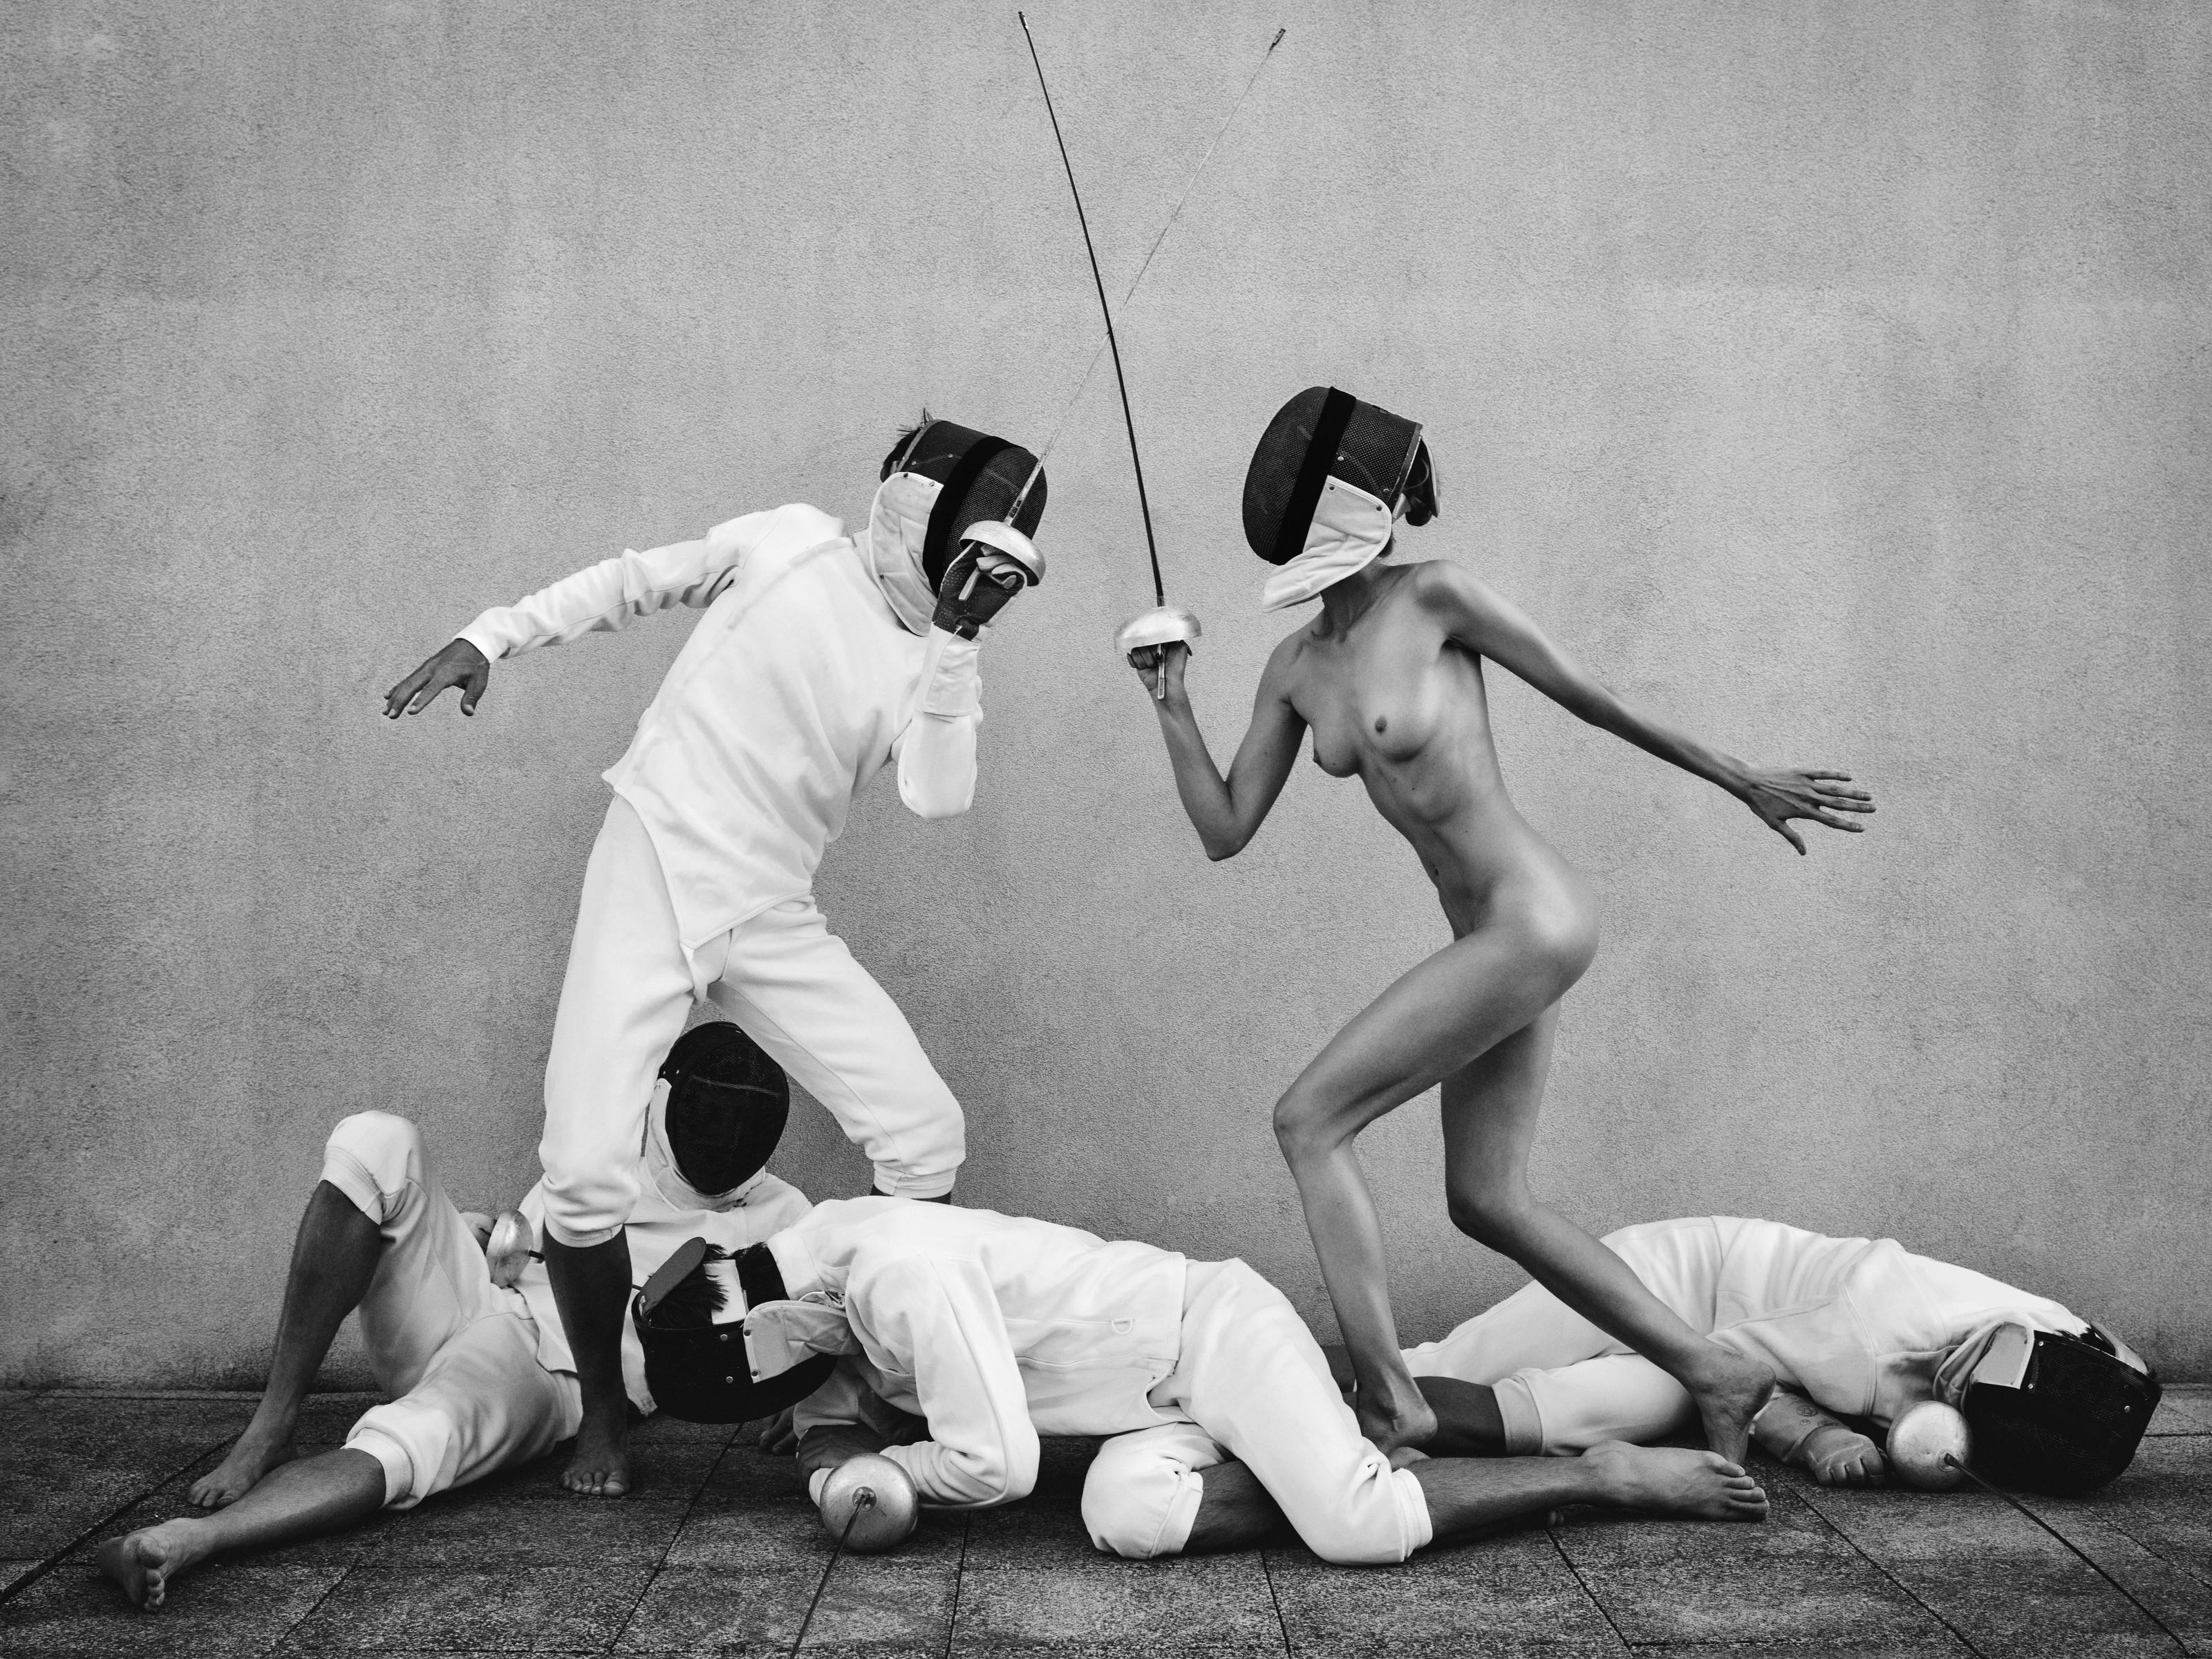 "Fencers 2" Photography 24" x 32" inch  Edition 2/7 by Lukas Dvorak 

24" x 32" inch 
Pigment print on Epson Fine ART paper
2015

Ships rolled in a tube 

ABOUT THE ARTIST
Lukas Dvorak is a Czech photographer born in Prague in 1982. His preference